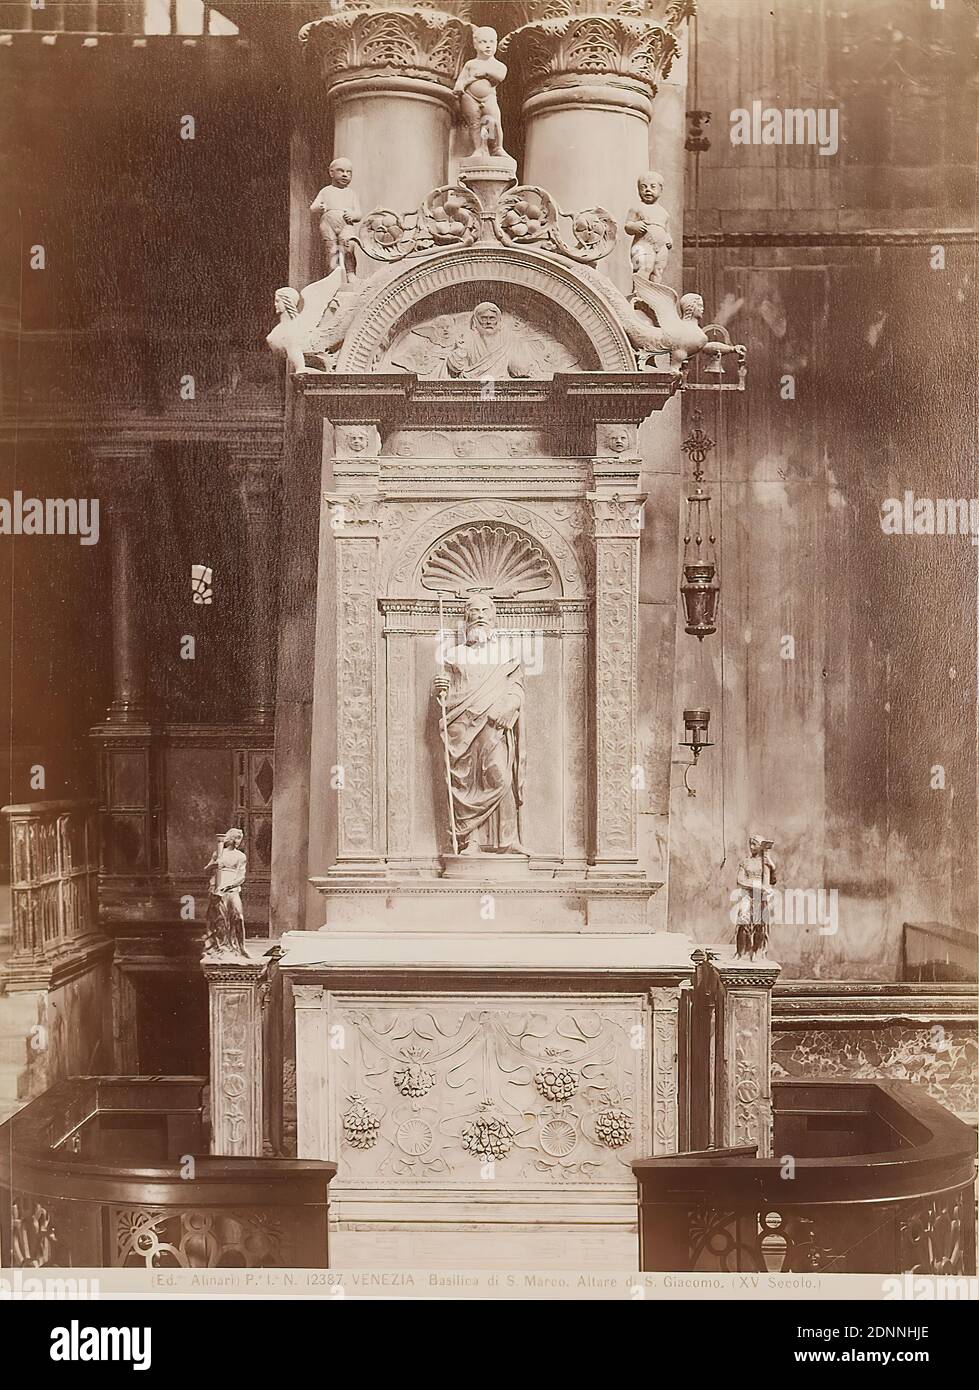 Altar of San Giacomo, St. Mark's Cathedral, Venice, albumin paper, black and white positive process, image size: height: 25.00 cm; width: 19.00 cm, 7. VENEZIA - Basilica di S. Marco. Altars di S. Giacomo. (XV Secolo.) With lead on cardboard: Pietro Lombardo soon after 1464, architectural photography, travel photography, interior of a church, altar, sculpture, sculpture art, Venice Stock Photo